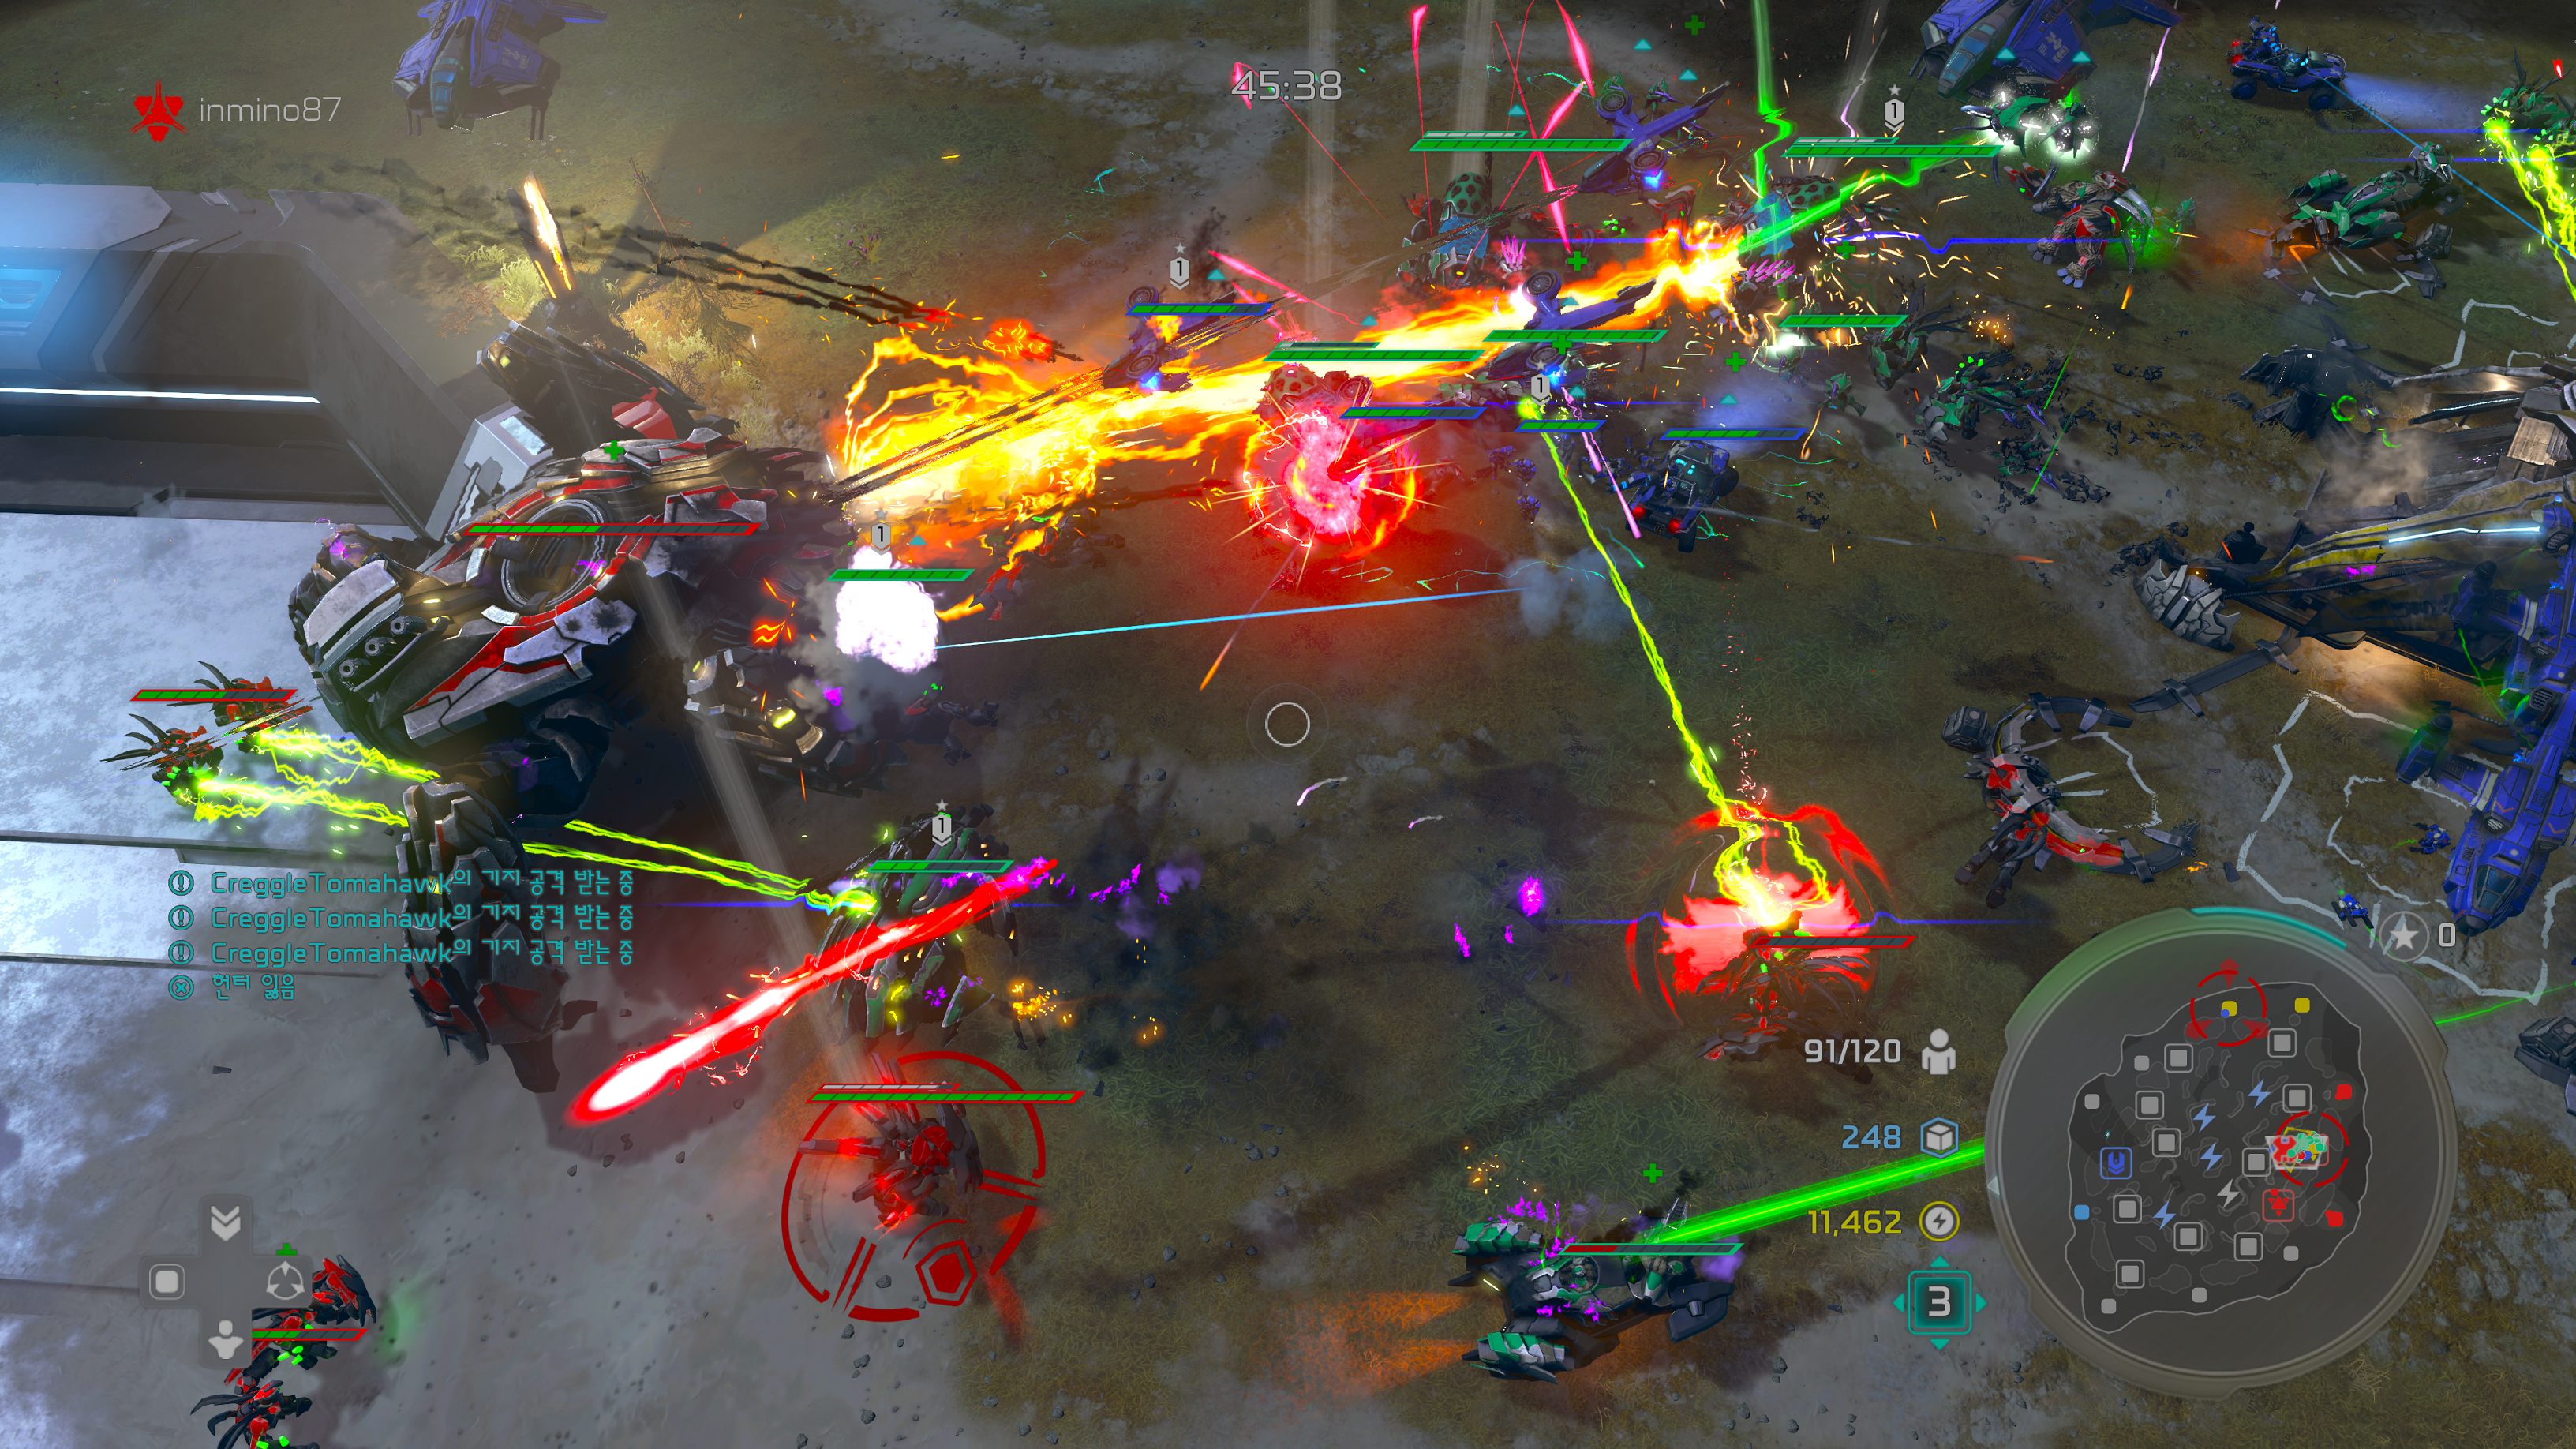 Halo Wars 2 2020-07-28 22-08-29.png